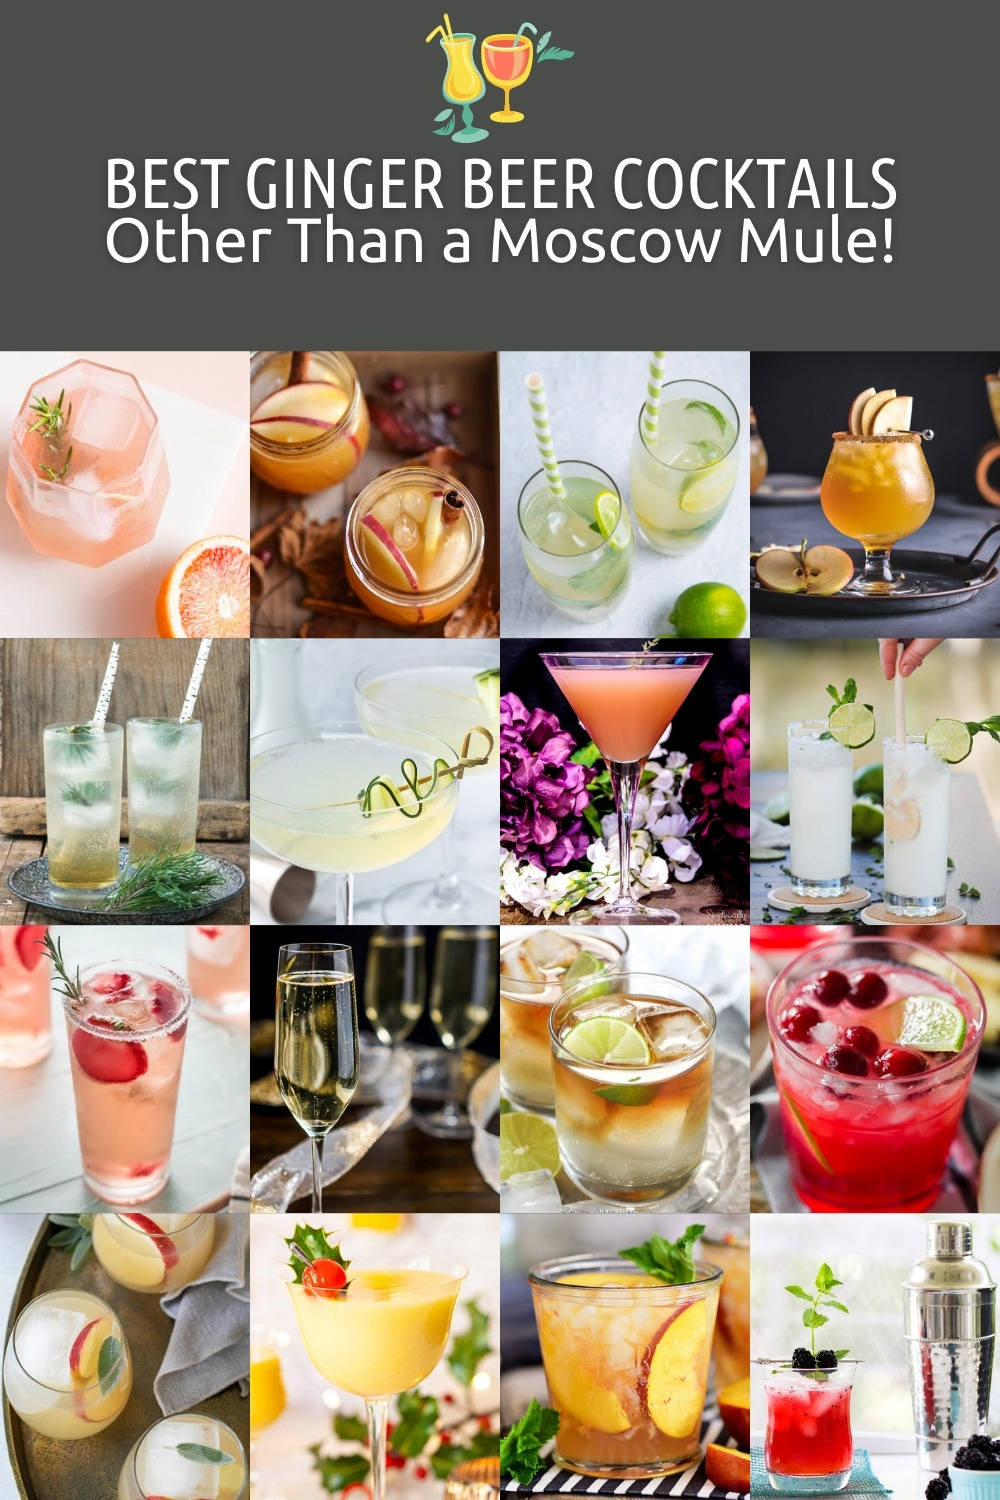 20 Best Ginger Beer Cocktails Other Than a Moscow Mule